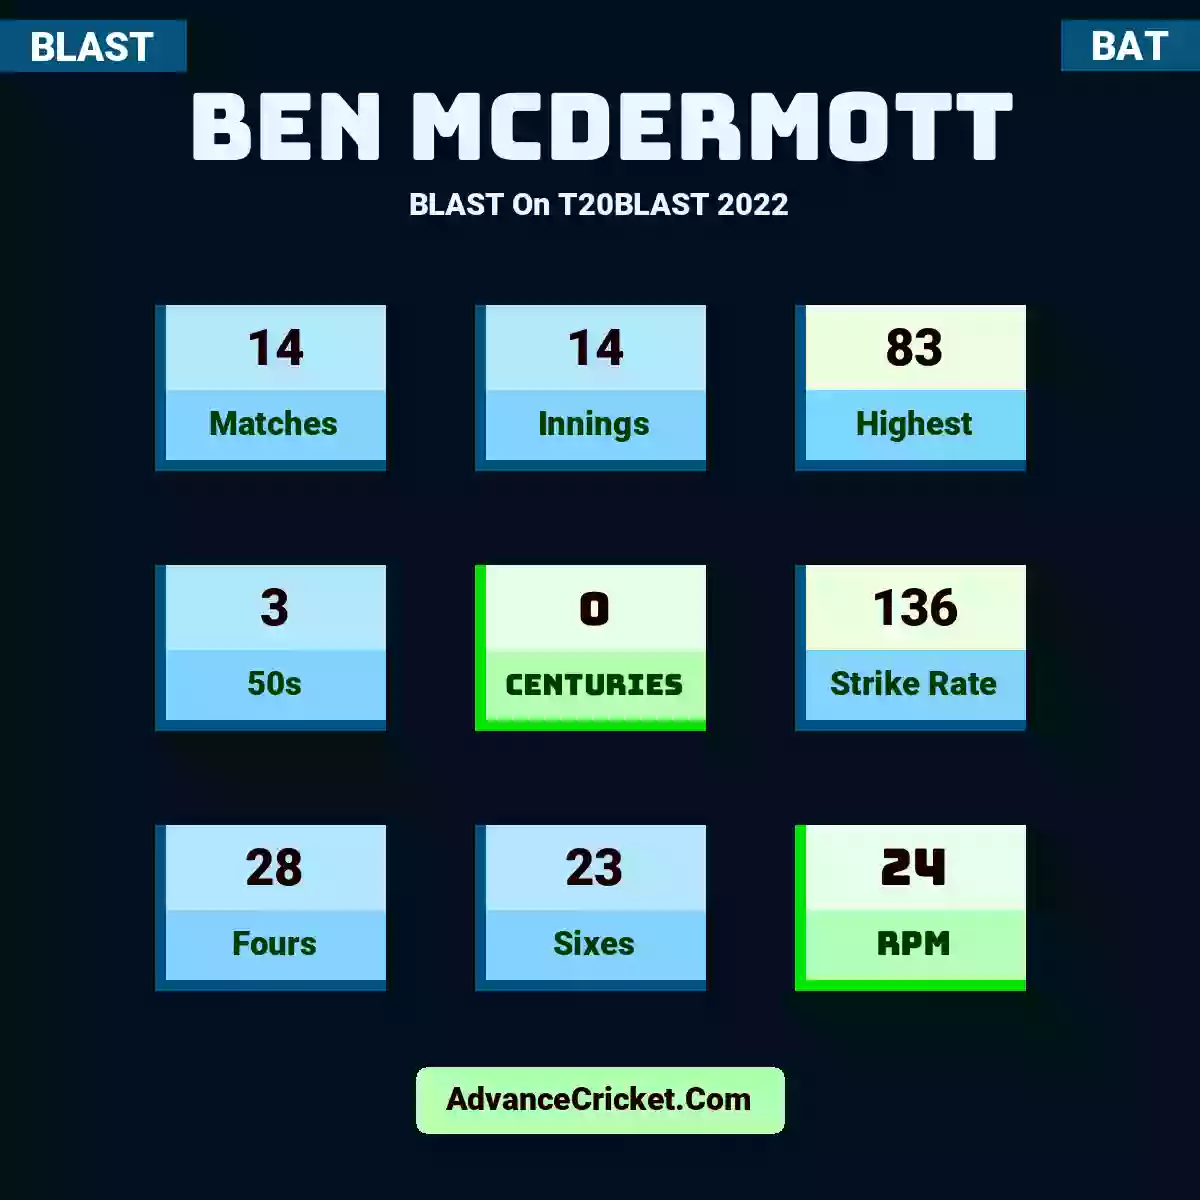 Ben McDermott BLAST  On T20BLAST 2022, Ben McDermott played 14 matches, scored 83 runs as highest, 3 half-centuries, and 0 centuries, with a strike rate of 136. B.McDermott hit 28 fours and 23 sixes, with an RPM of 24.